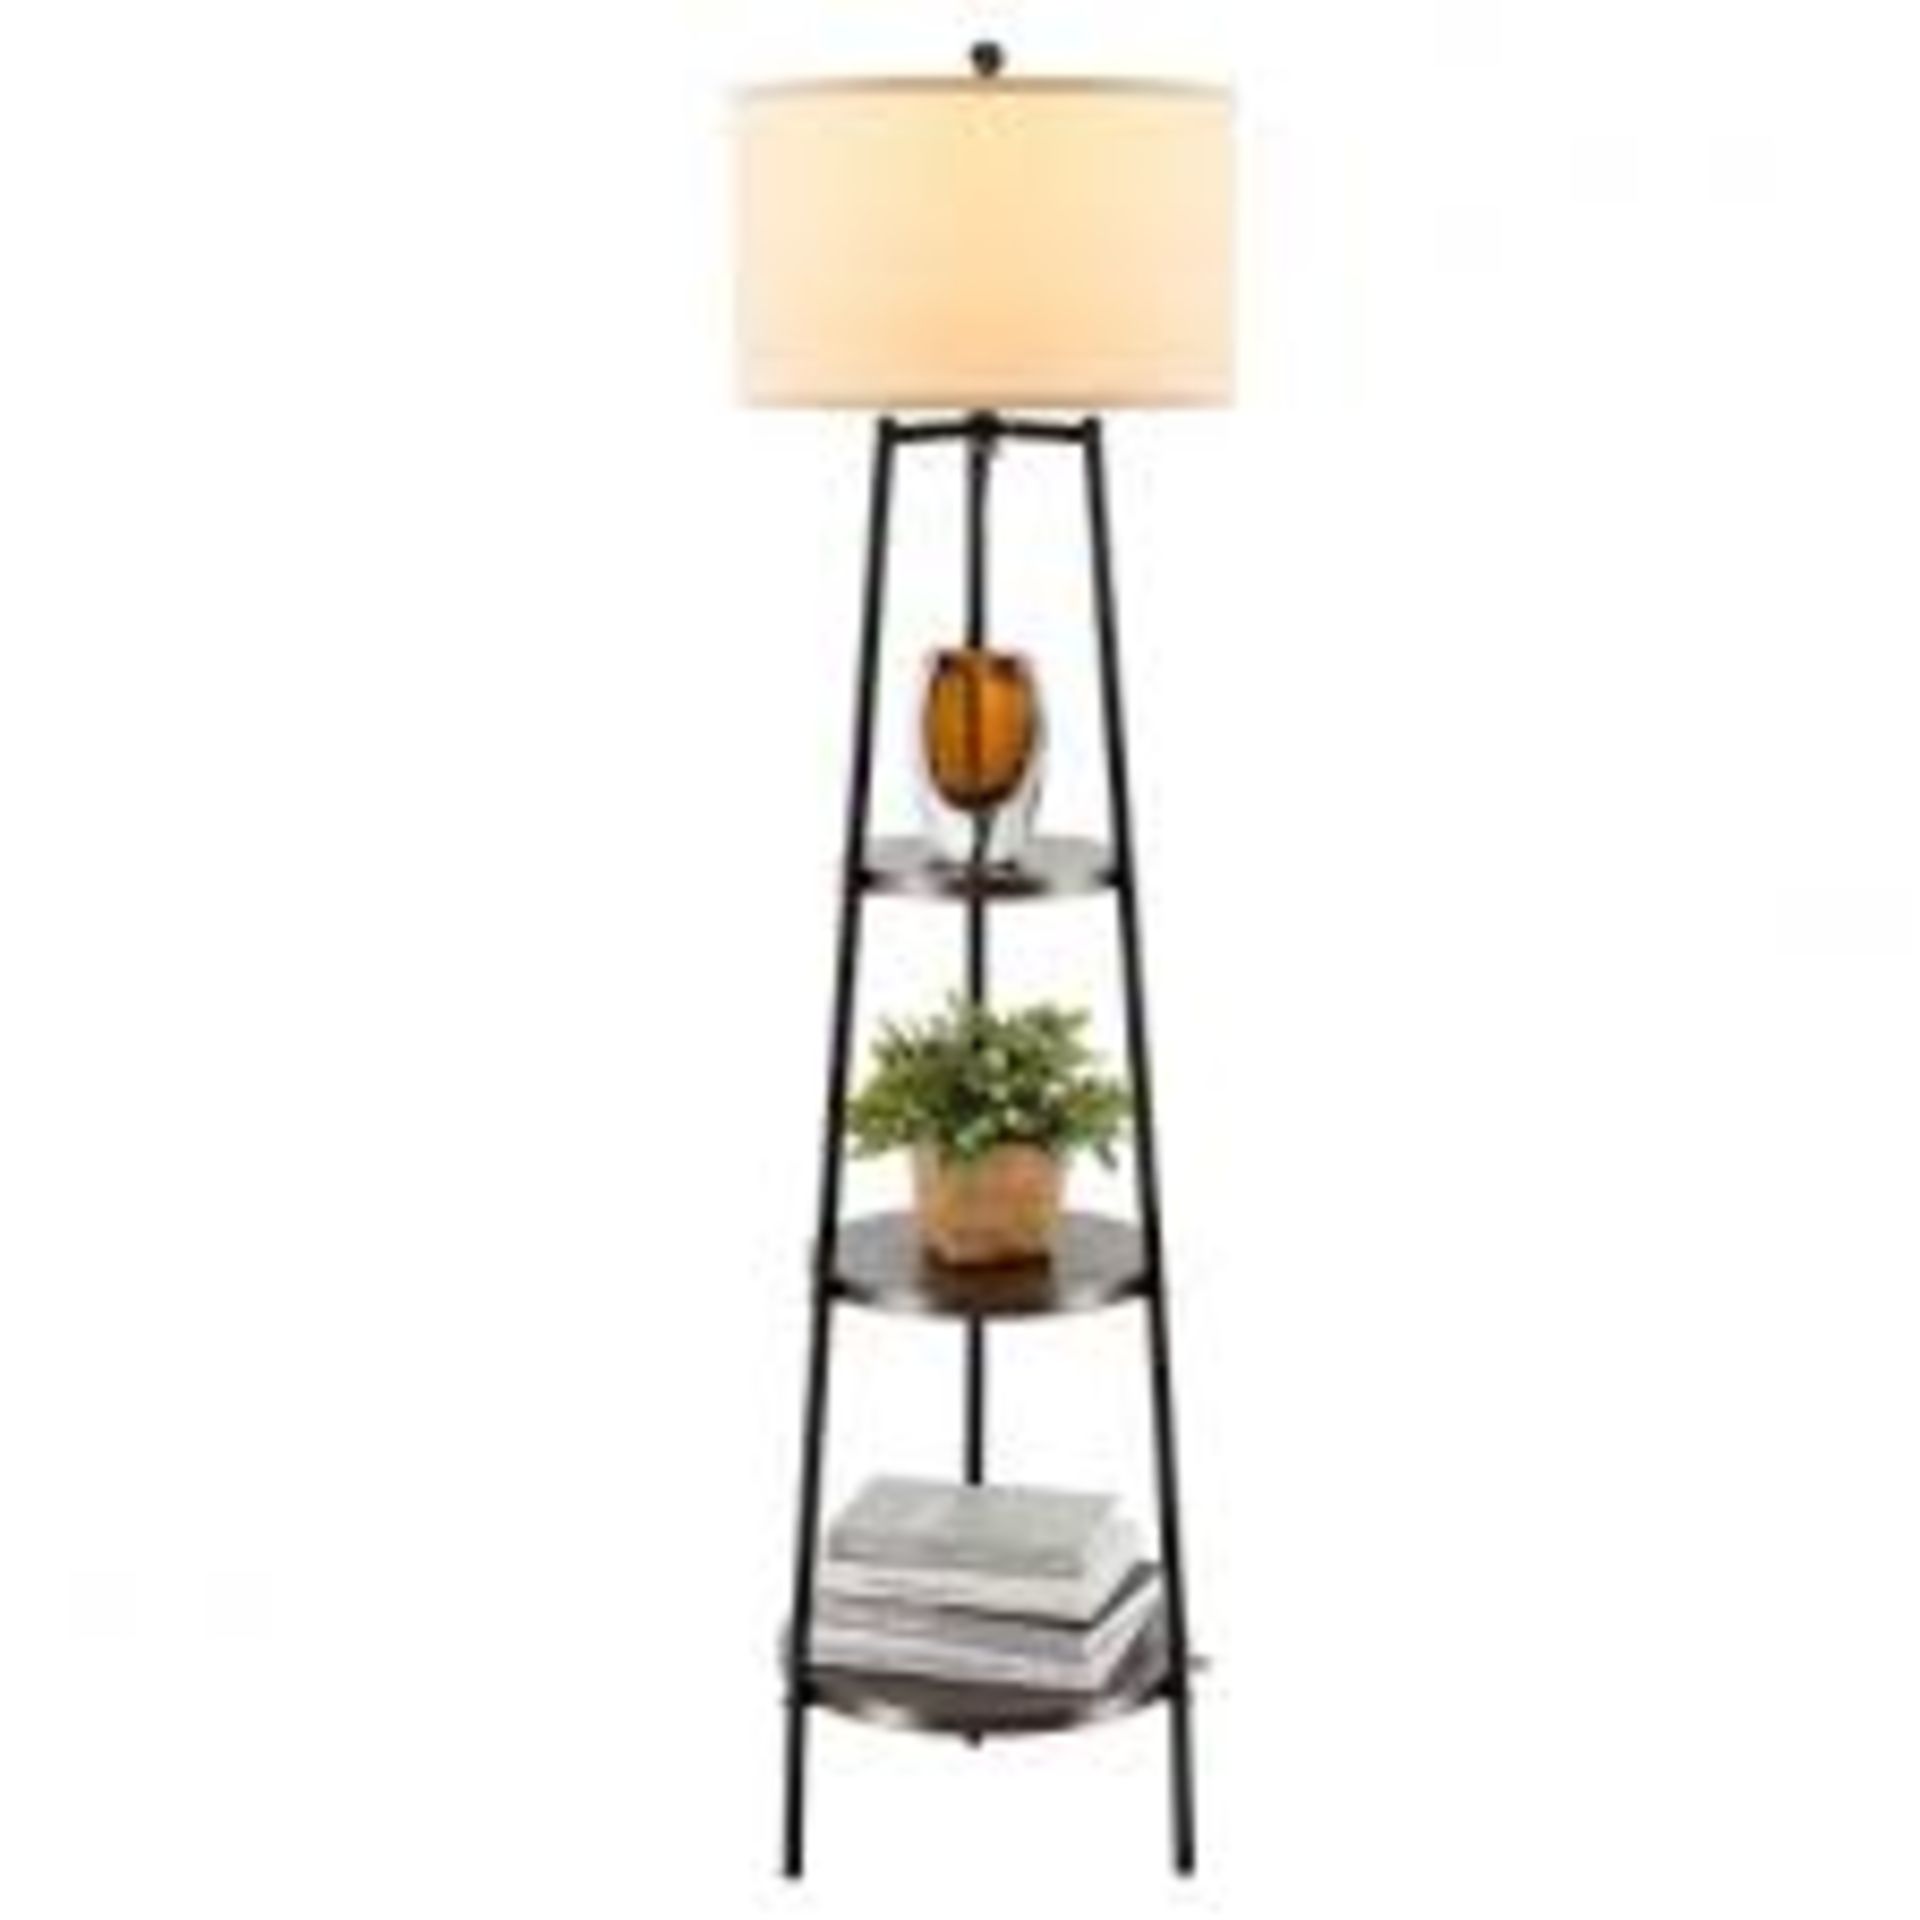 Floor Lamp with Shelves Linen Lampshad and Chain Switch. - R14.7. Enjoy slowing down time with the